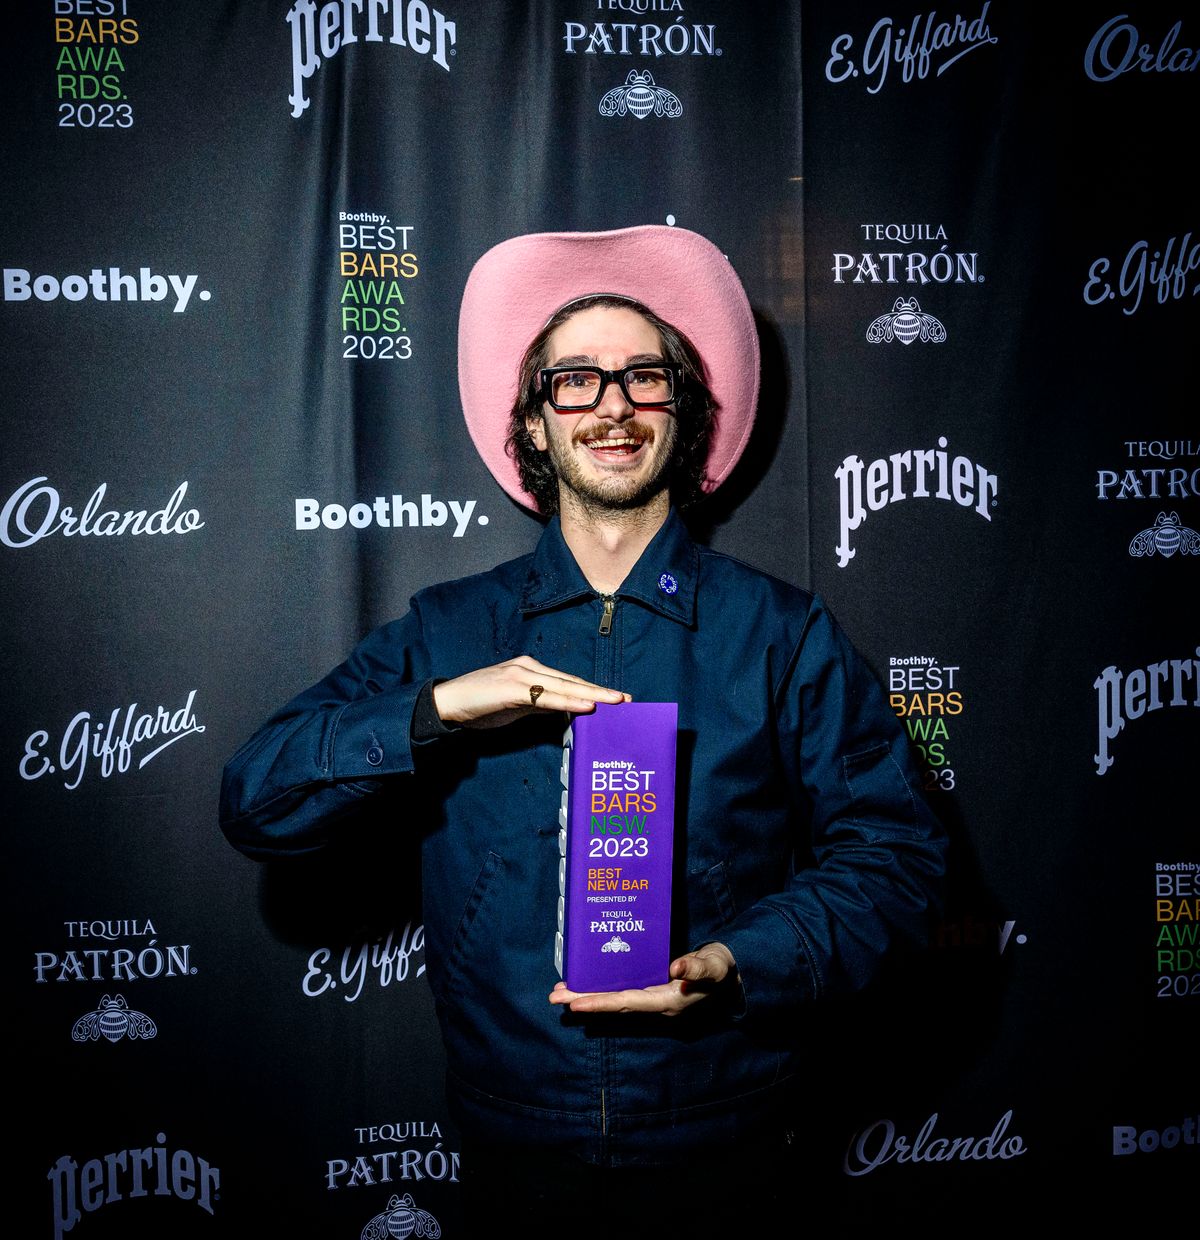 Exit interview: Harrison Kenney talks Bar Planet, winning Best New Bar in NSW, and the future